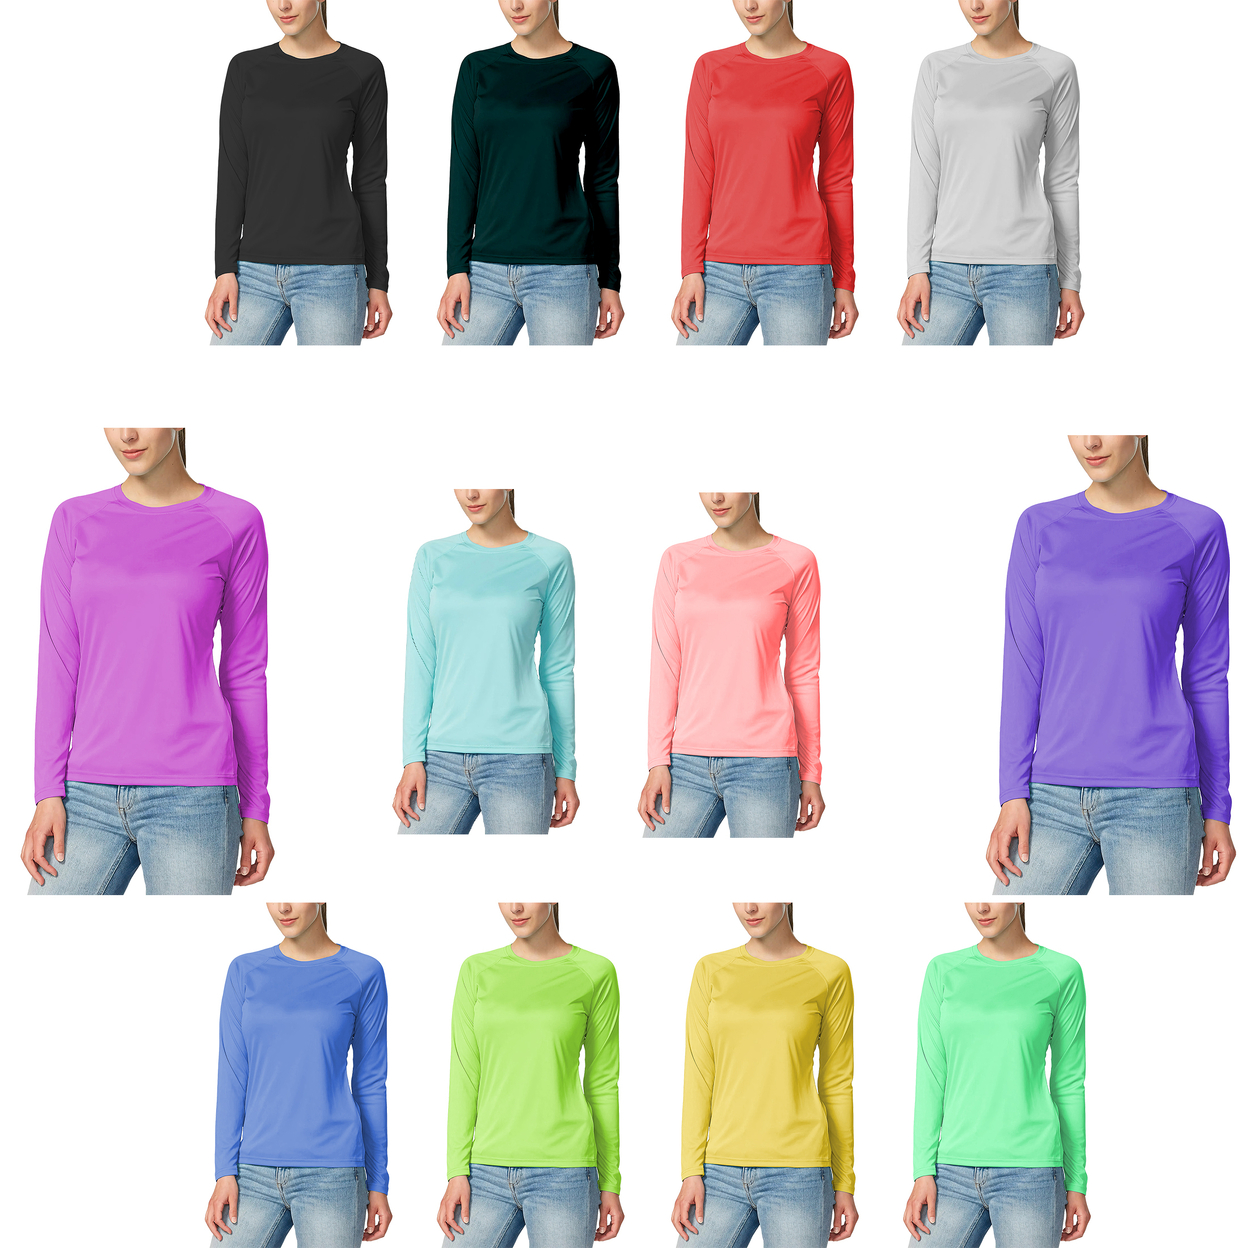 3-Pack: Women's Dri-Fit Moisture-Wicking Breathable Long Sleeve T-Shirt - X-large